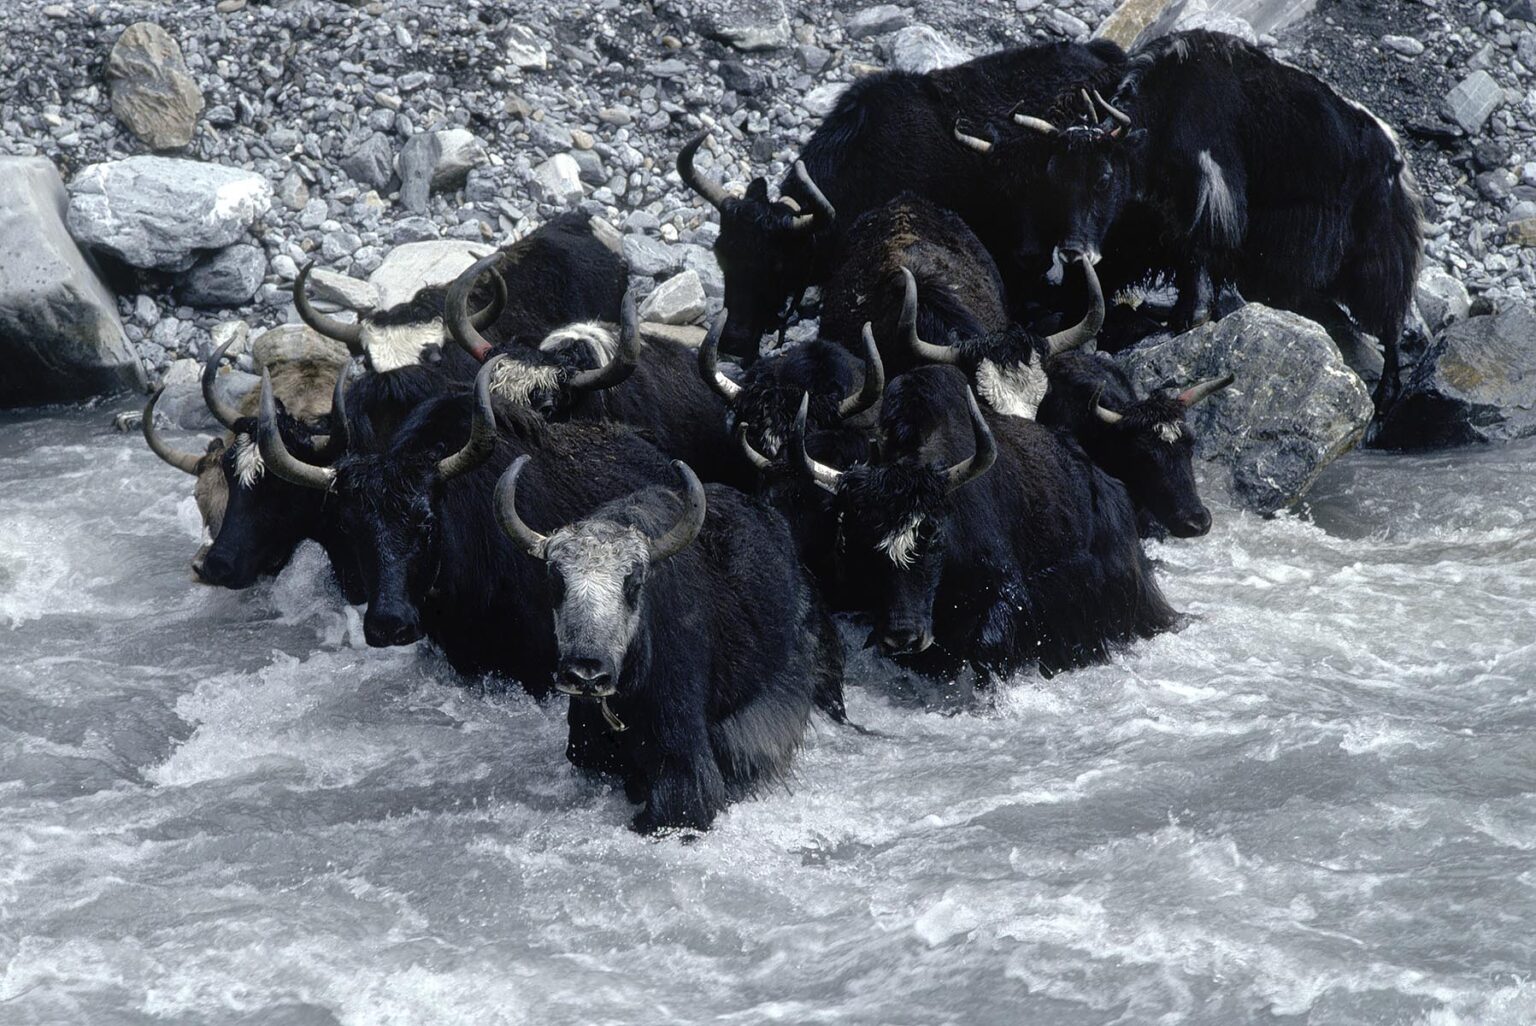 YAKS CROSS the CHALUNG RIVER by wading and swimming - DOLPO DISTRICT, NEPAL